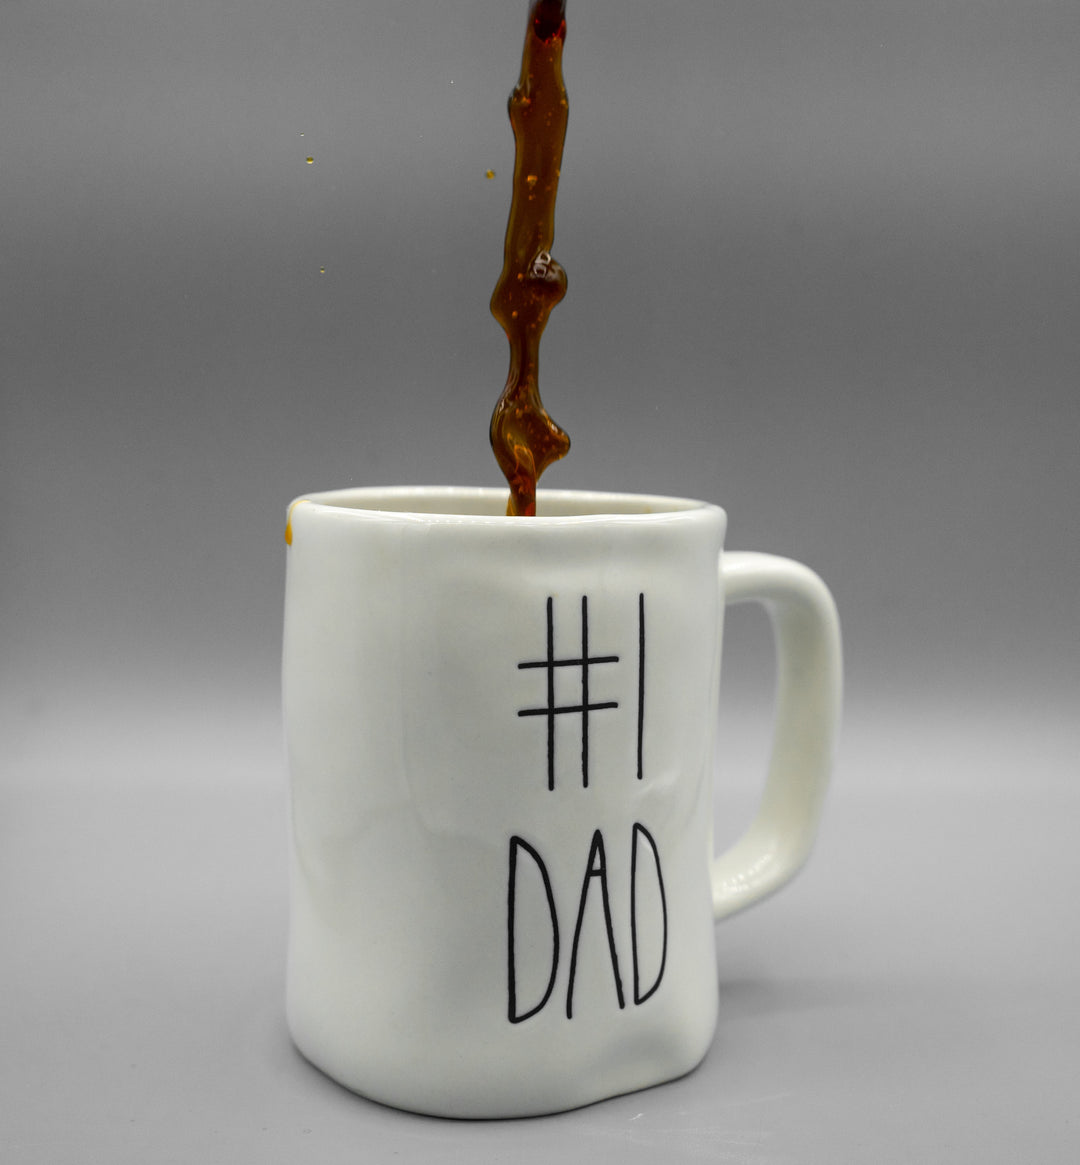 The ultimate fathers day gift guide by Lifes A Hamper